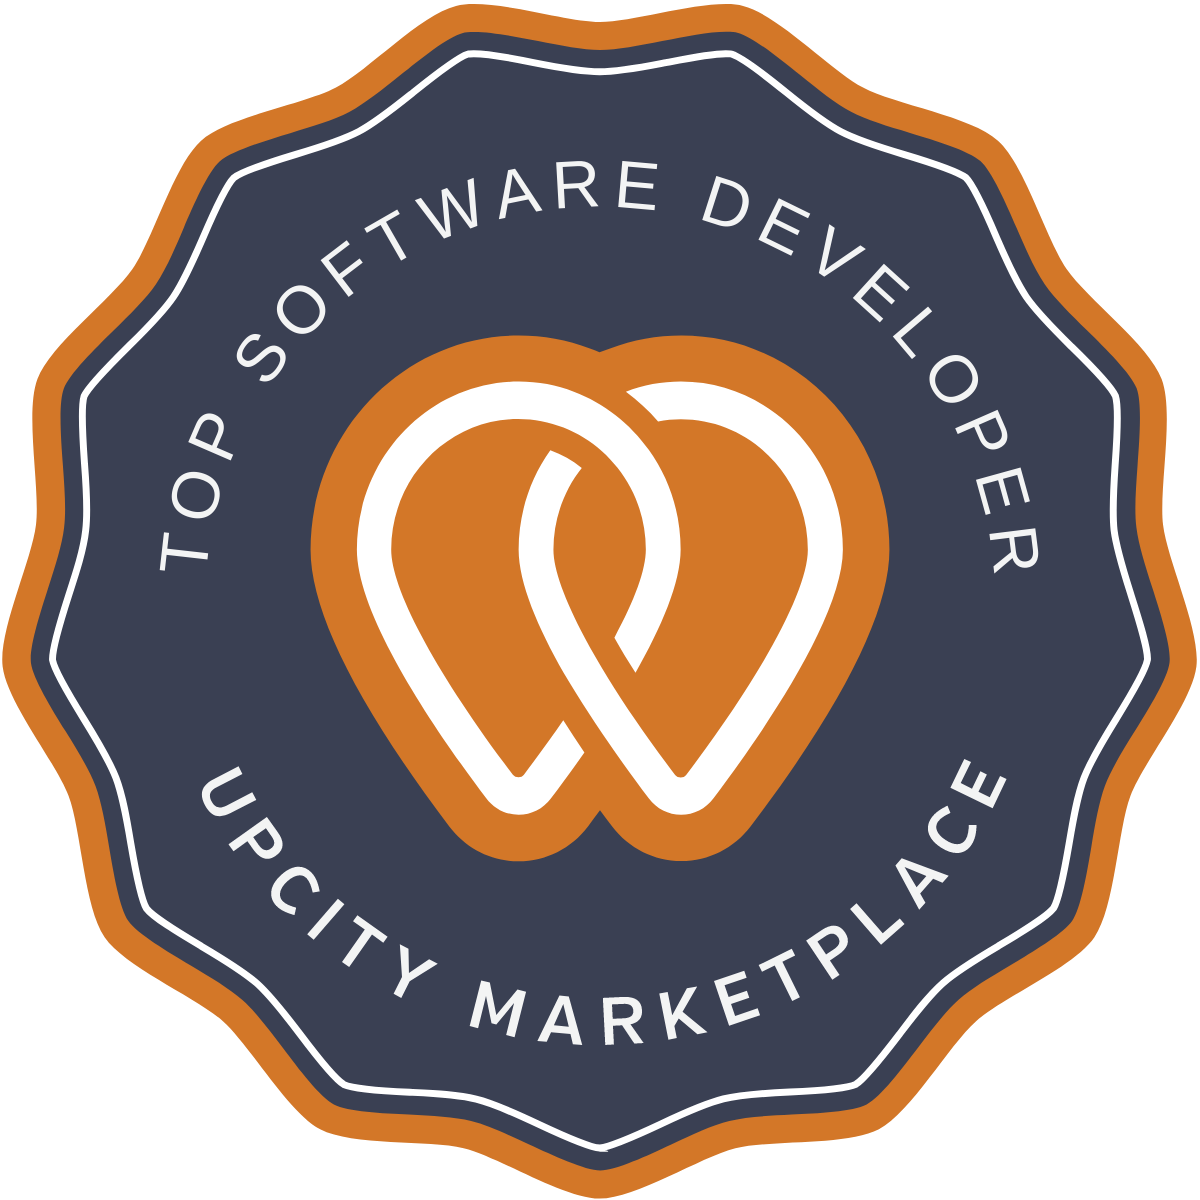 Rendr is a Top Software Development Company on Upcity